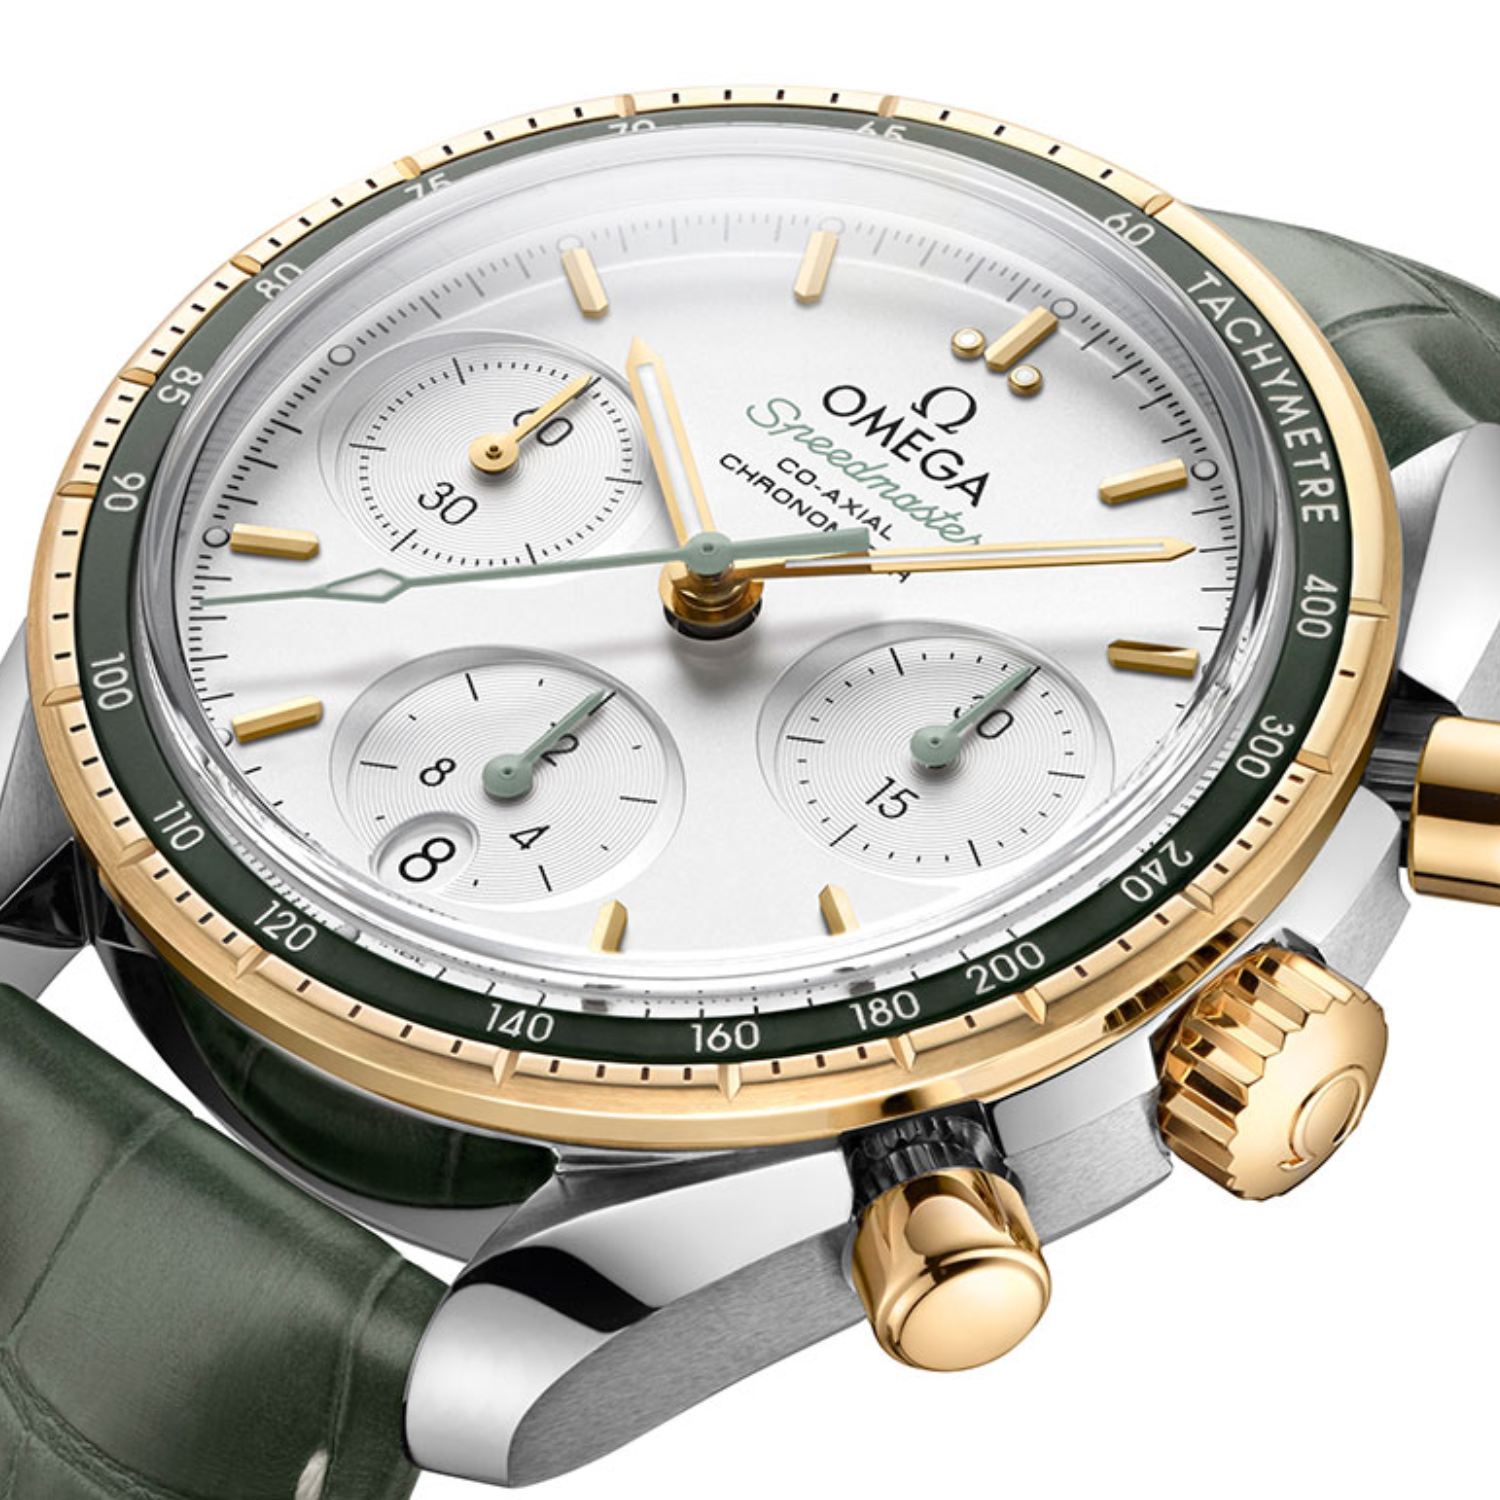 OMEGA Speedmaster Co-Axial Chronometer Chronograph, 38mm, Steel & Gold, Automatic